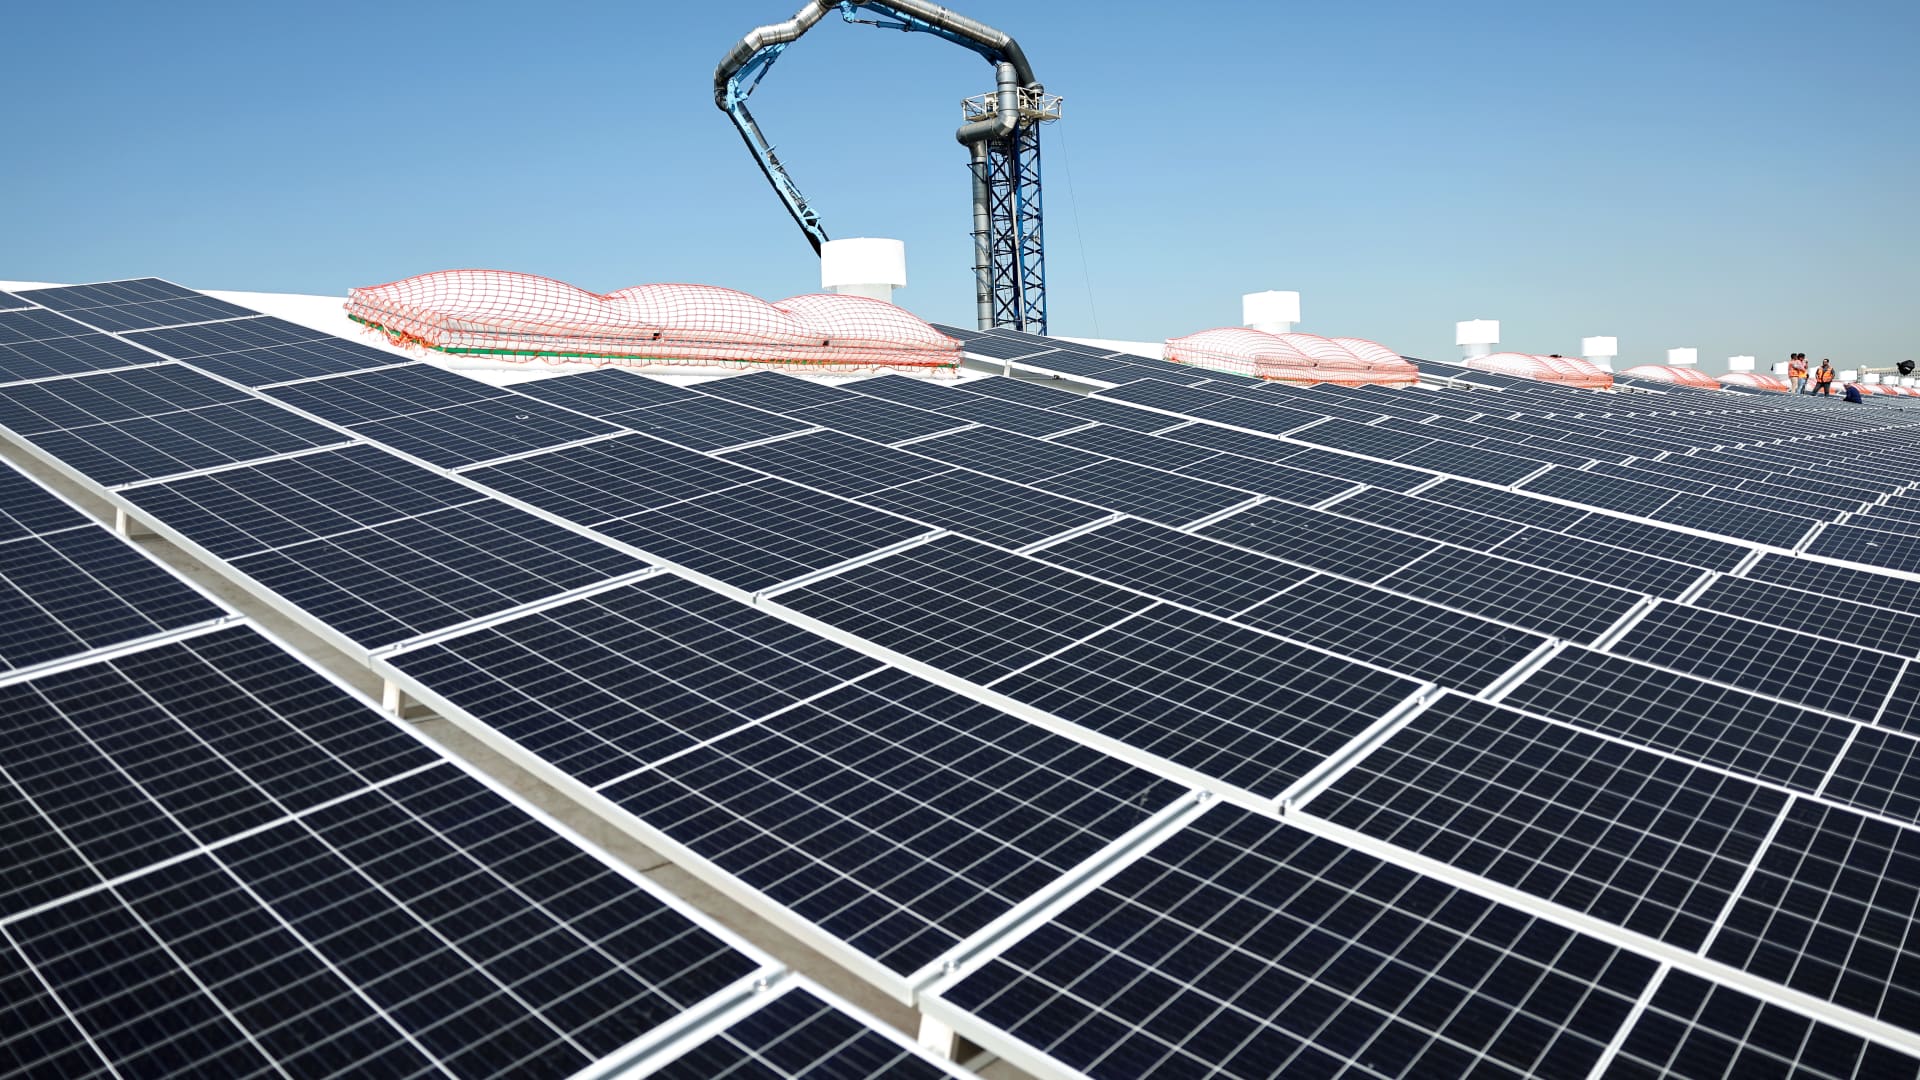 Workers install solar panels during the completion phase of a 4-acre solar rooftop atop AltaSea's research and development facility at the Port of Los Angeles, in the San Pedro neighborhood, on April 21, 2023 in Los Angeles, California.